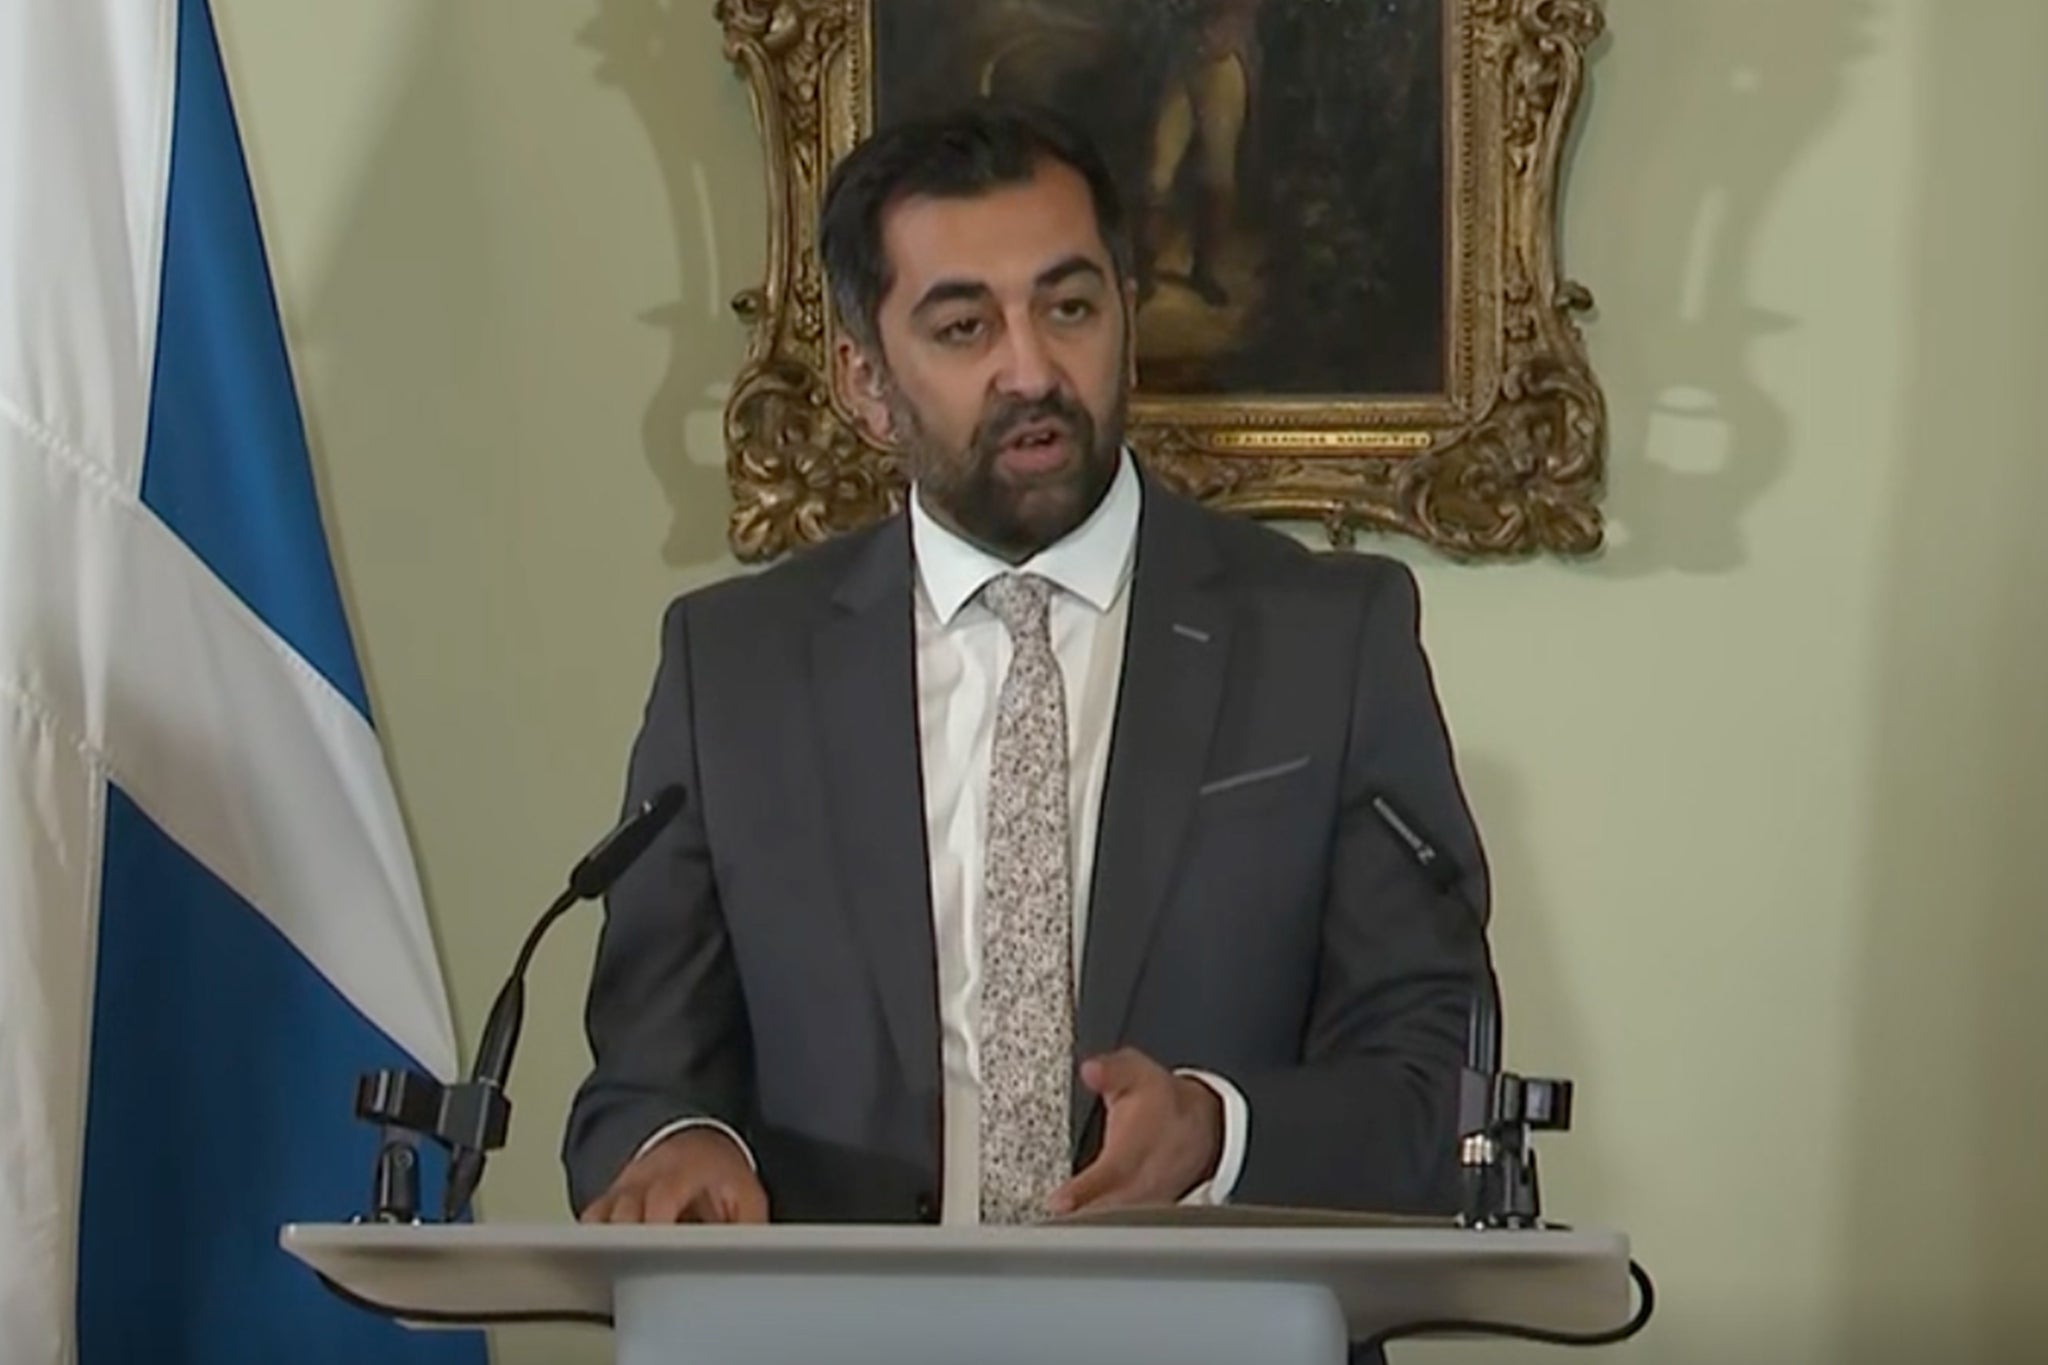 Humza Yousaf has stepped down as Scottish first minister as he faced two no confidence votes